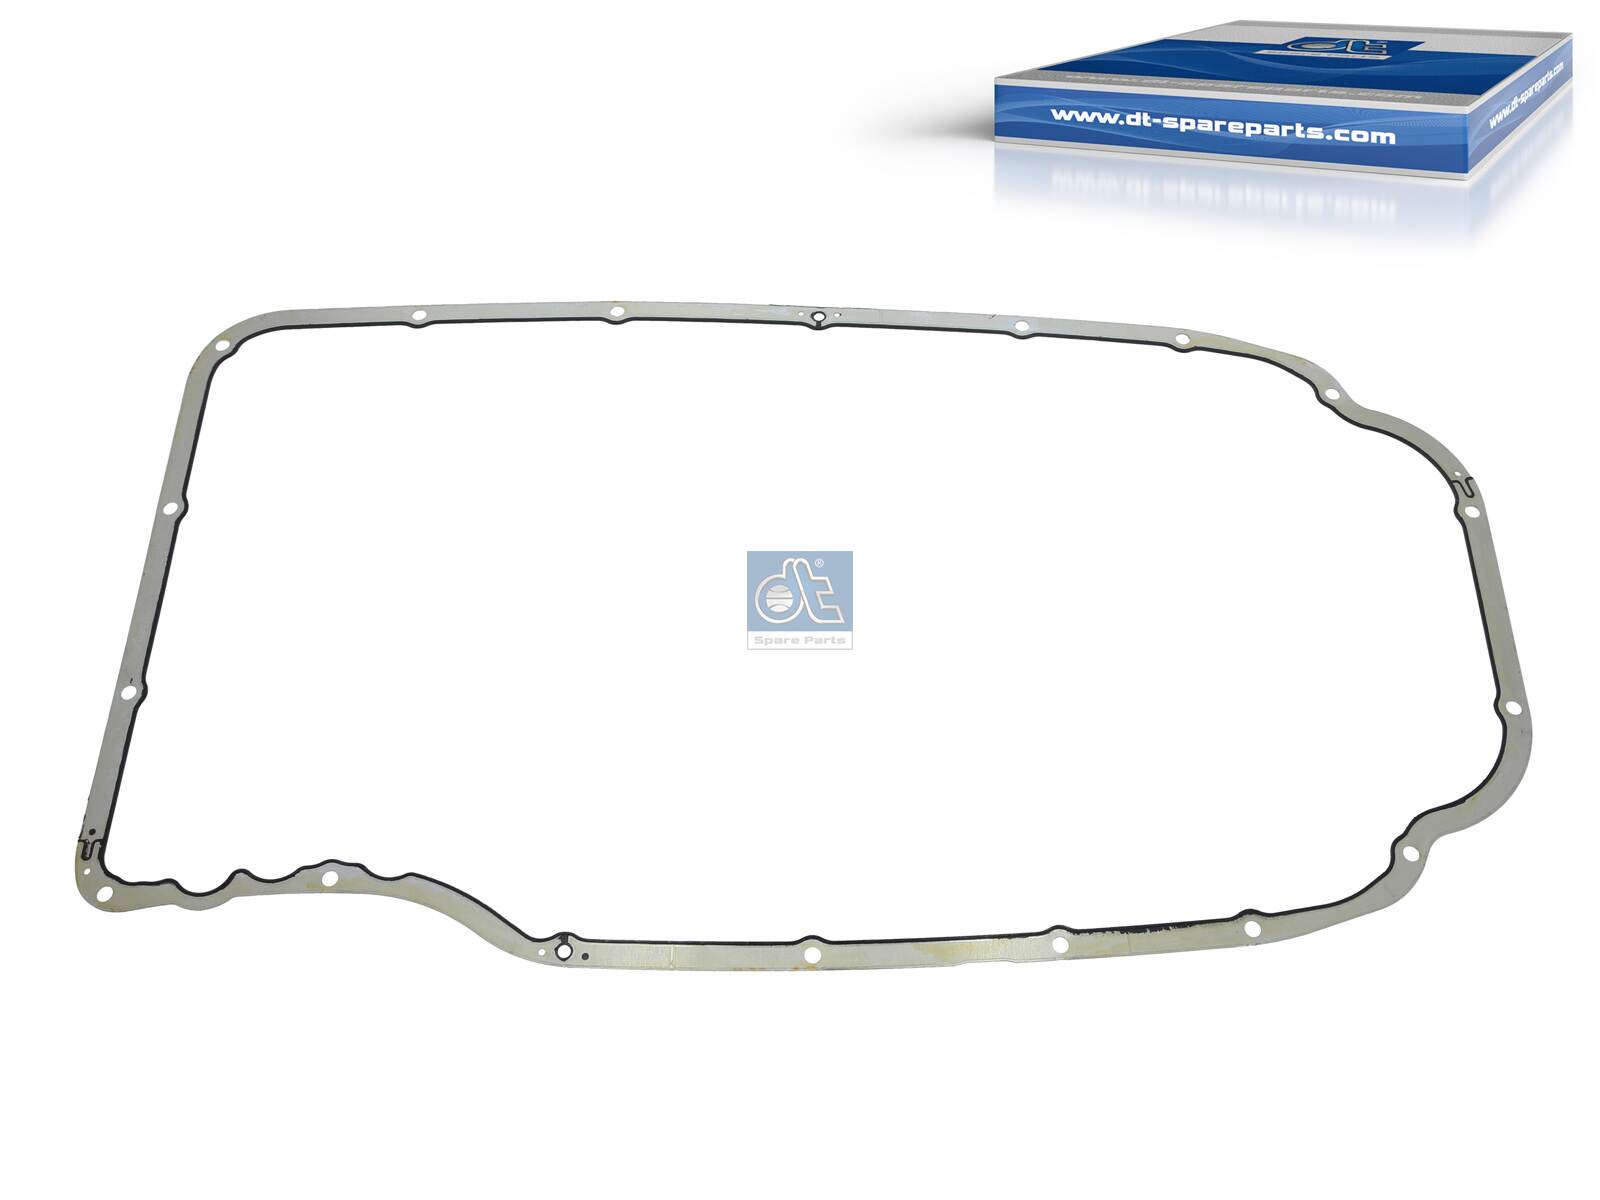 1.24506, Gasket, oil sump, DT Spare Parts, 2252095, 046.061, 1520507O, 1566974, 174302, 25650.12, 259.961, 71-42909-00, 99403, EPL-095